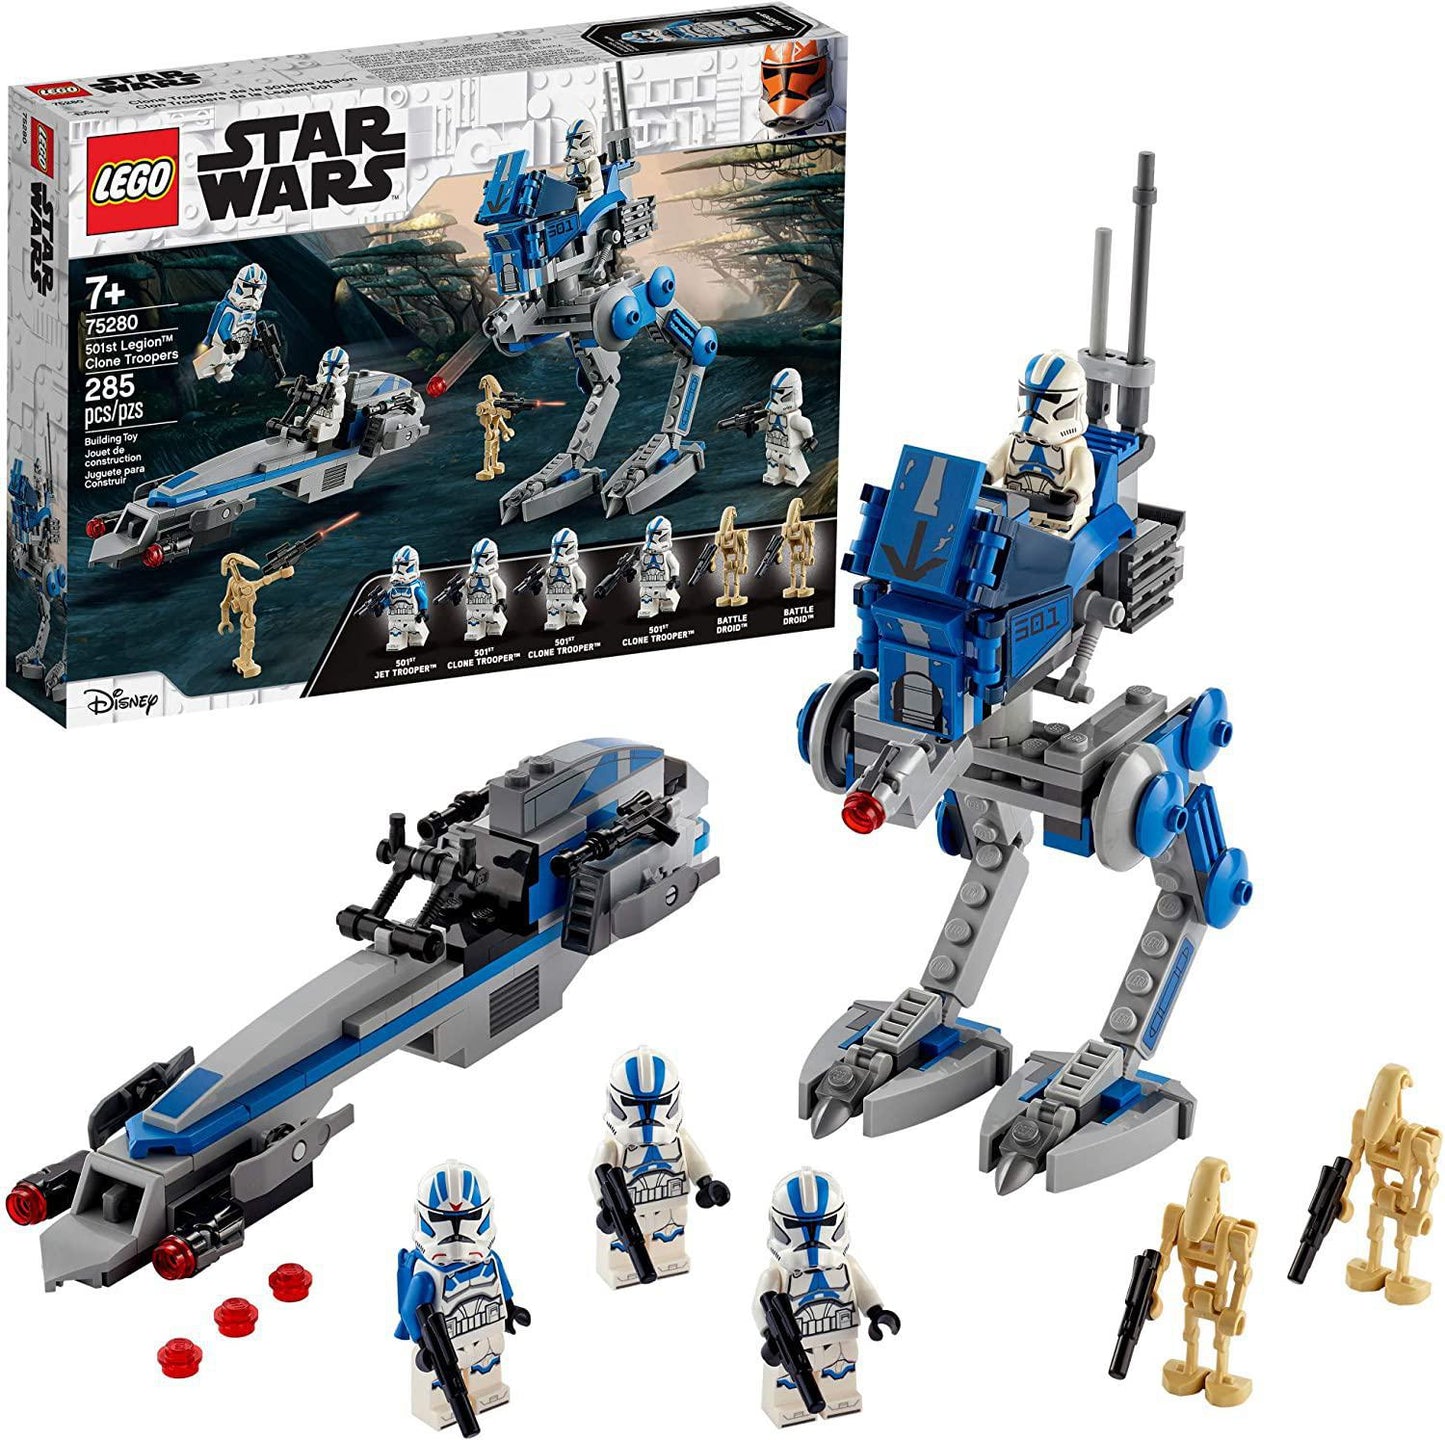 LEGO Star Wars 501st Legion Clone Troopers 75280 Building Kit, Great Gift or Special Surprise for Kids, New 2020 (285 Pieces)